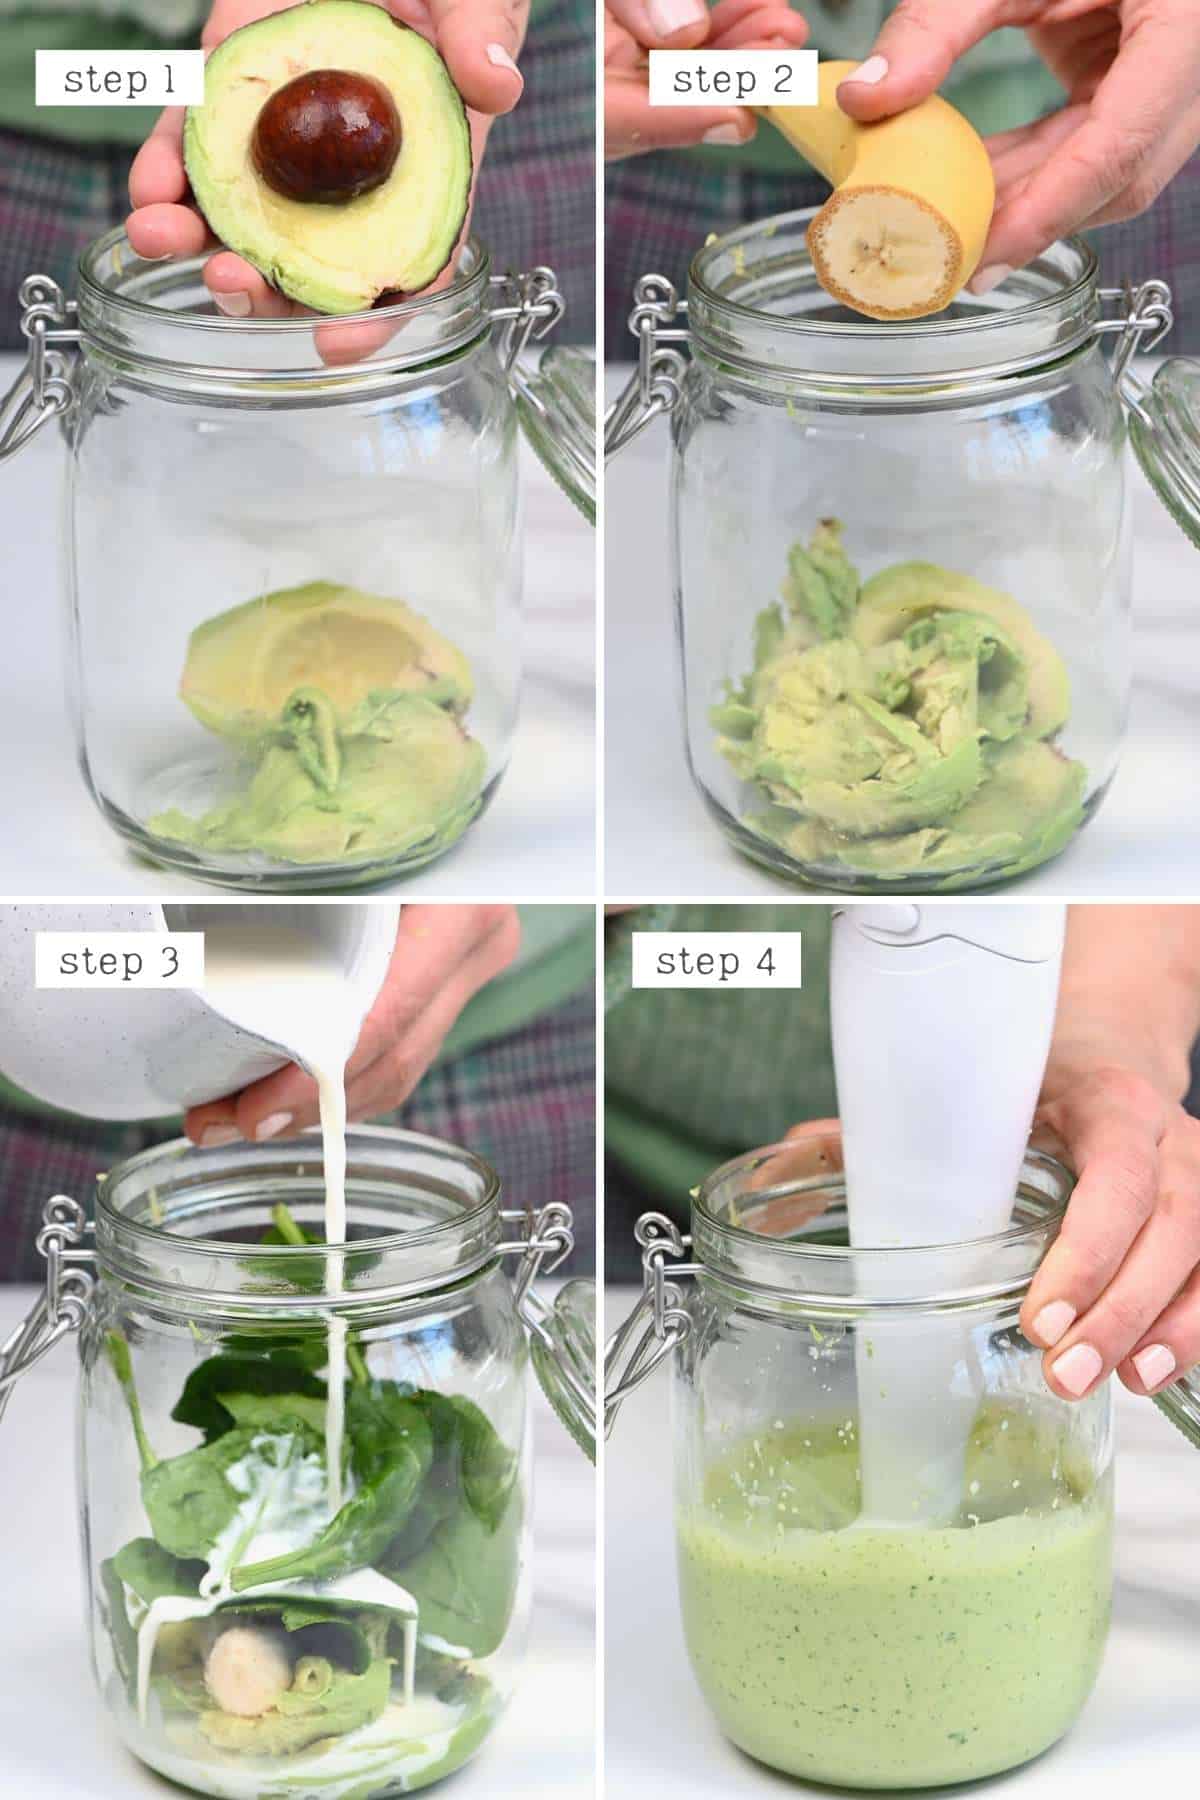 Steps for making an avocado smoothie